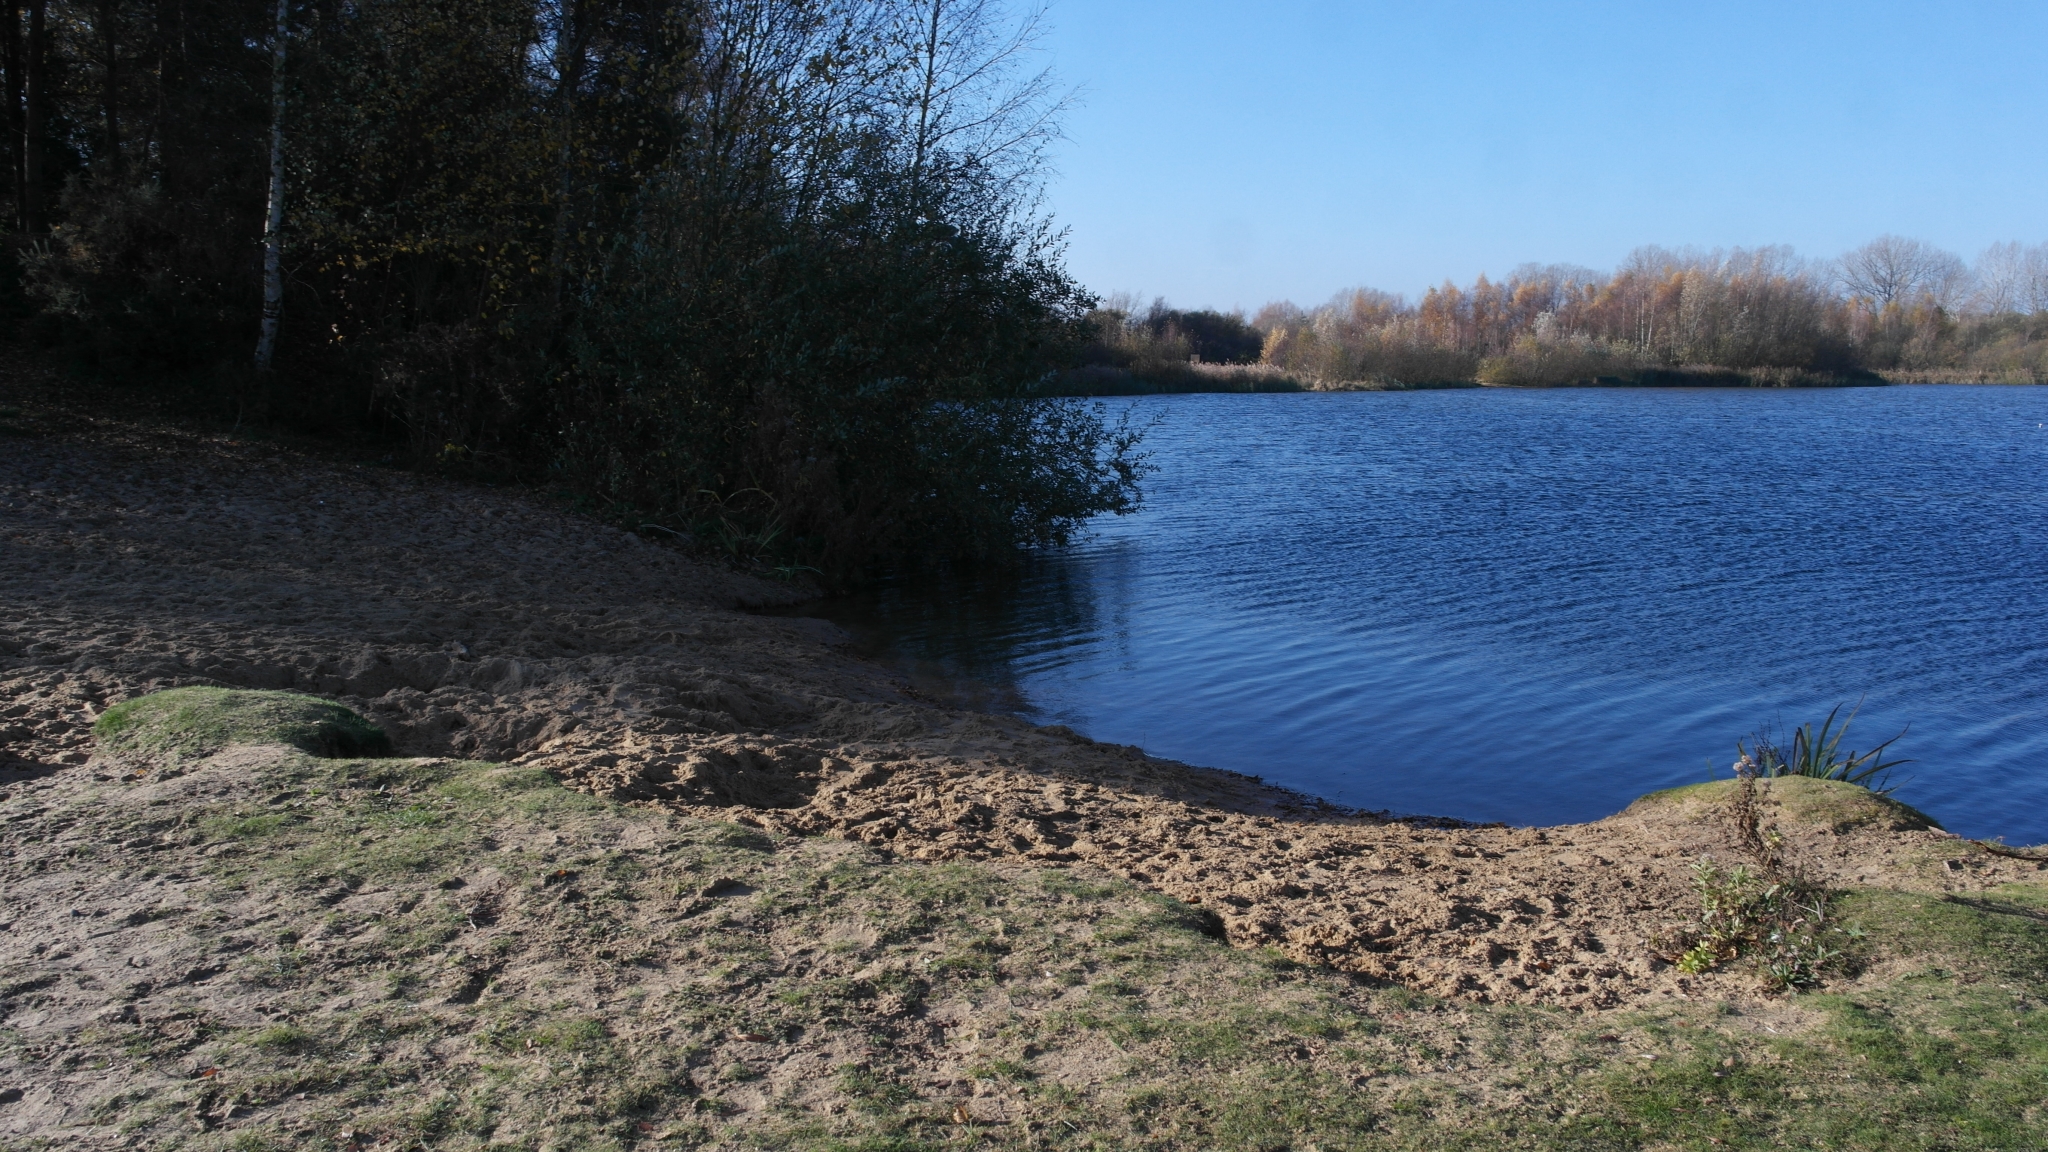 A photo from the FoTF Conservation Event - November 2018 - Undetaking clearance at the Lynford Lake Waters Edge : A shot of Lynford Lake